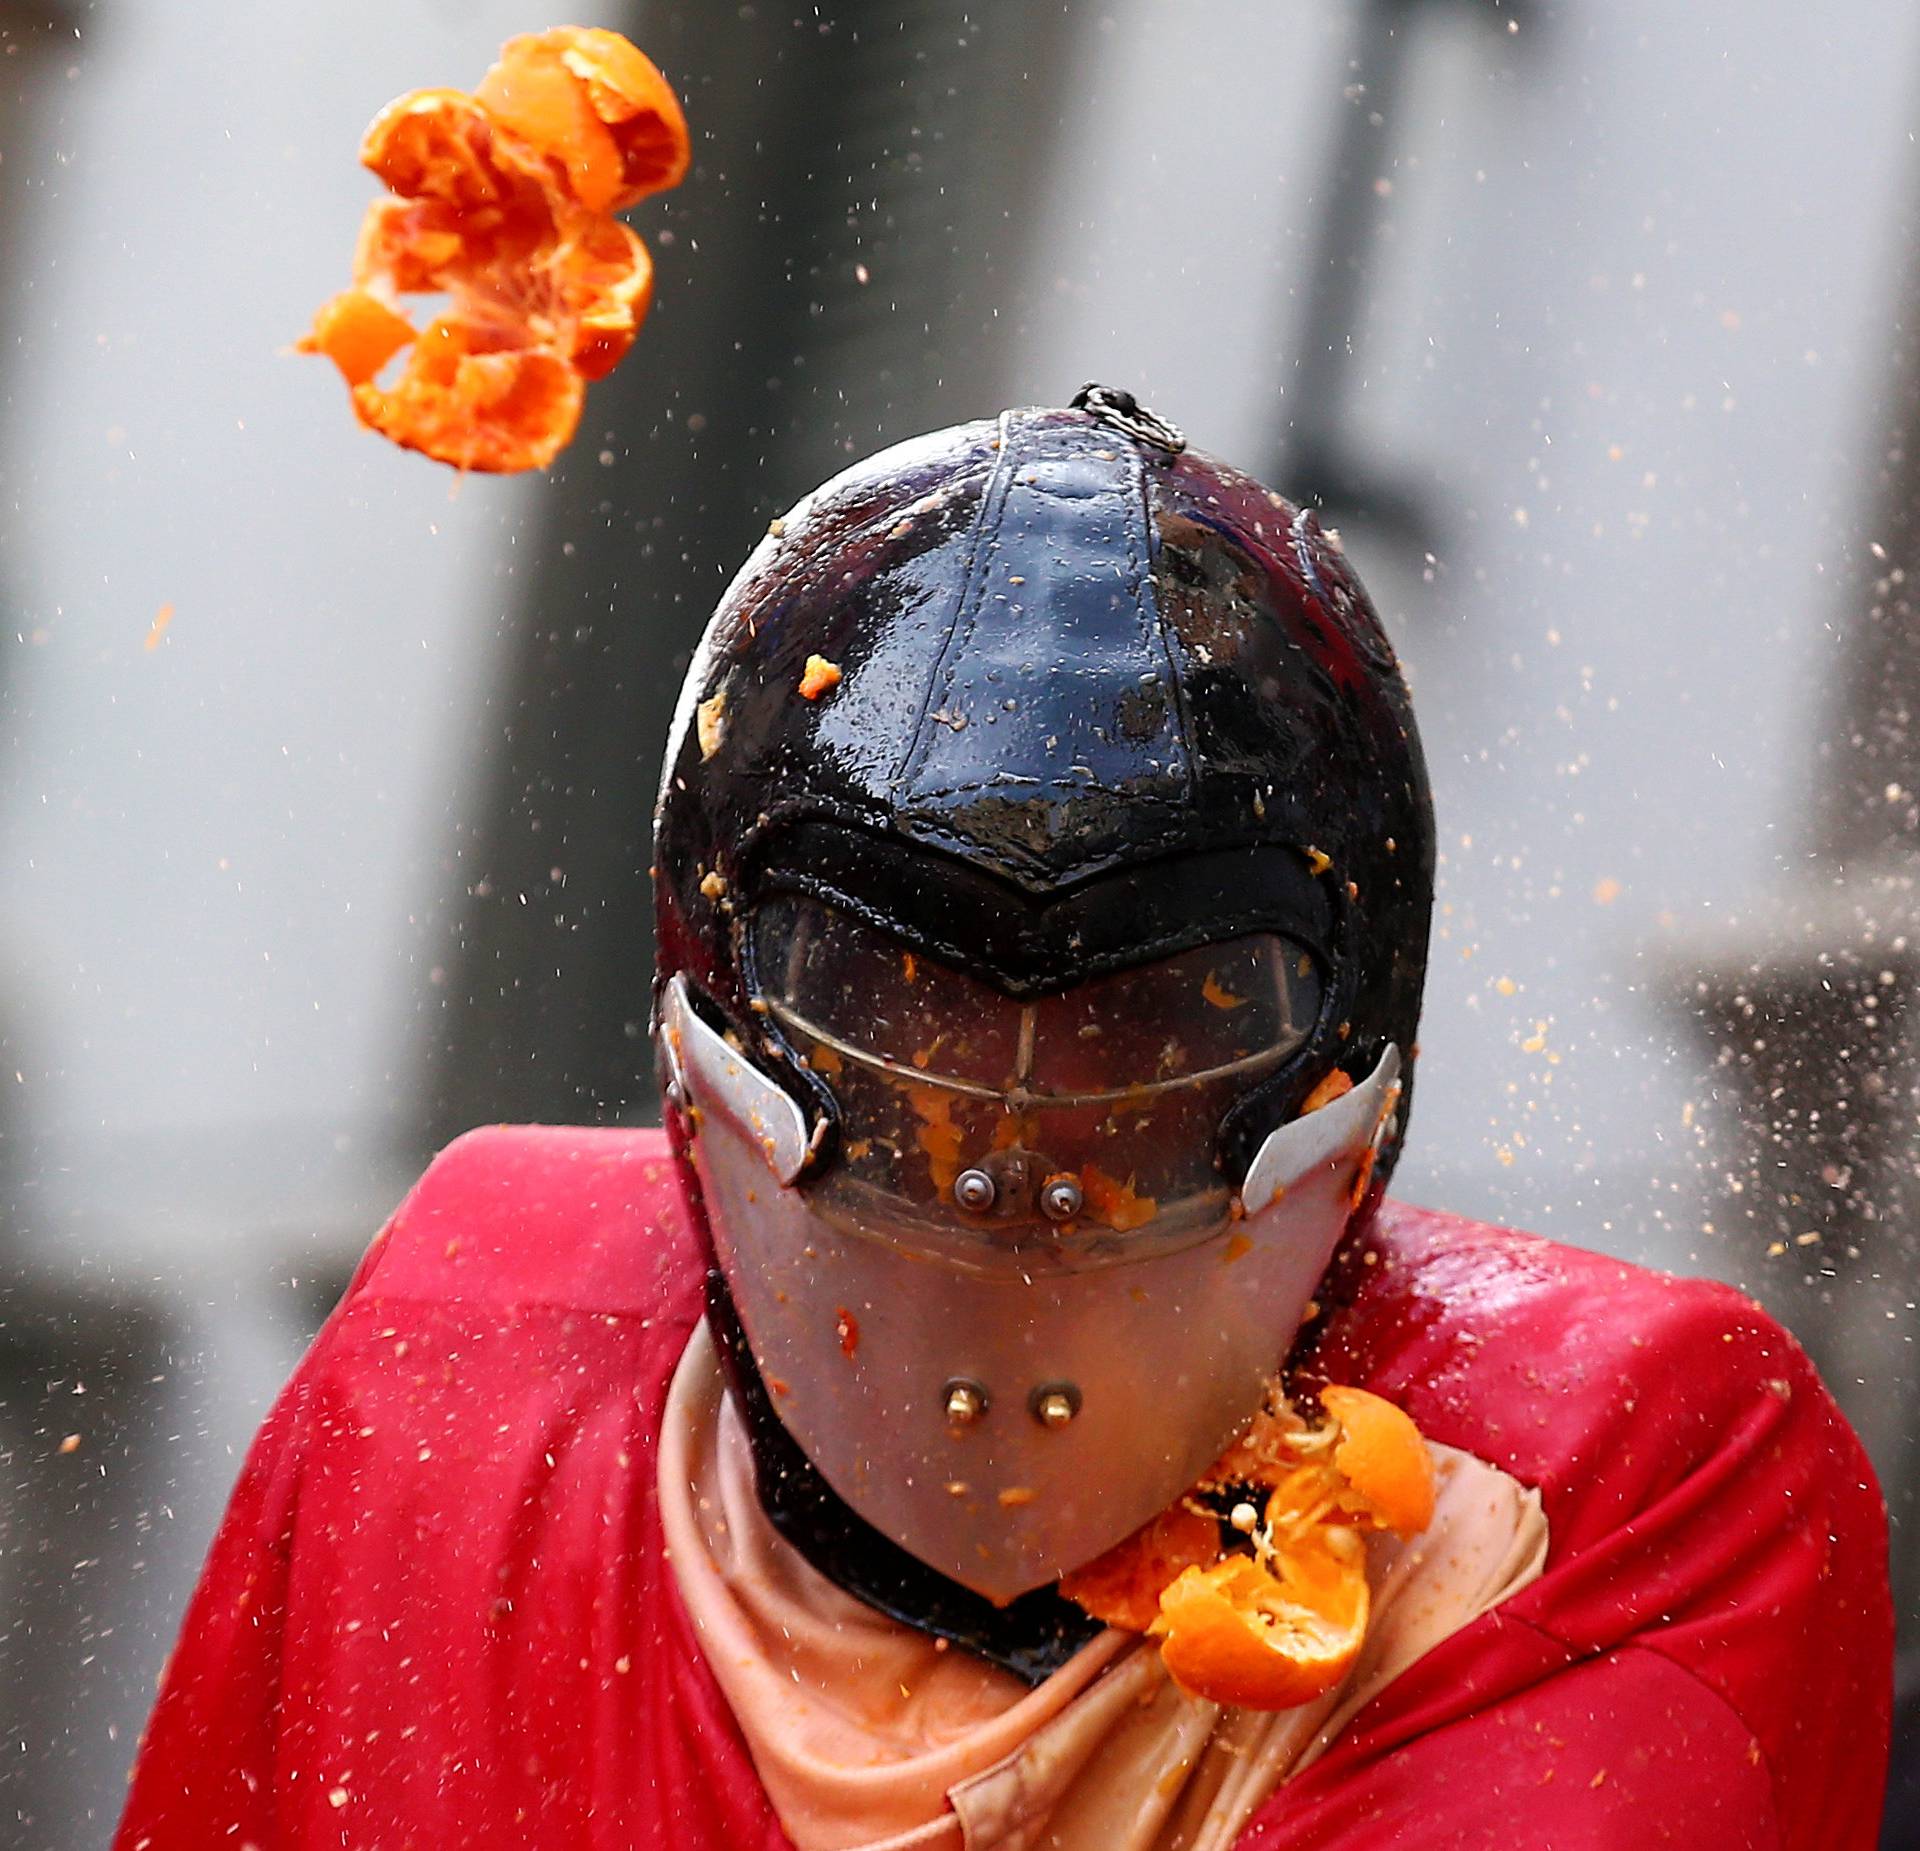 A member of a team is hit by oranges during an annual carnival battle in the northern Italian town of Ivrea